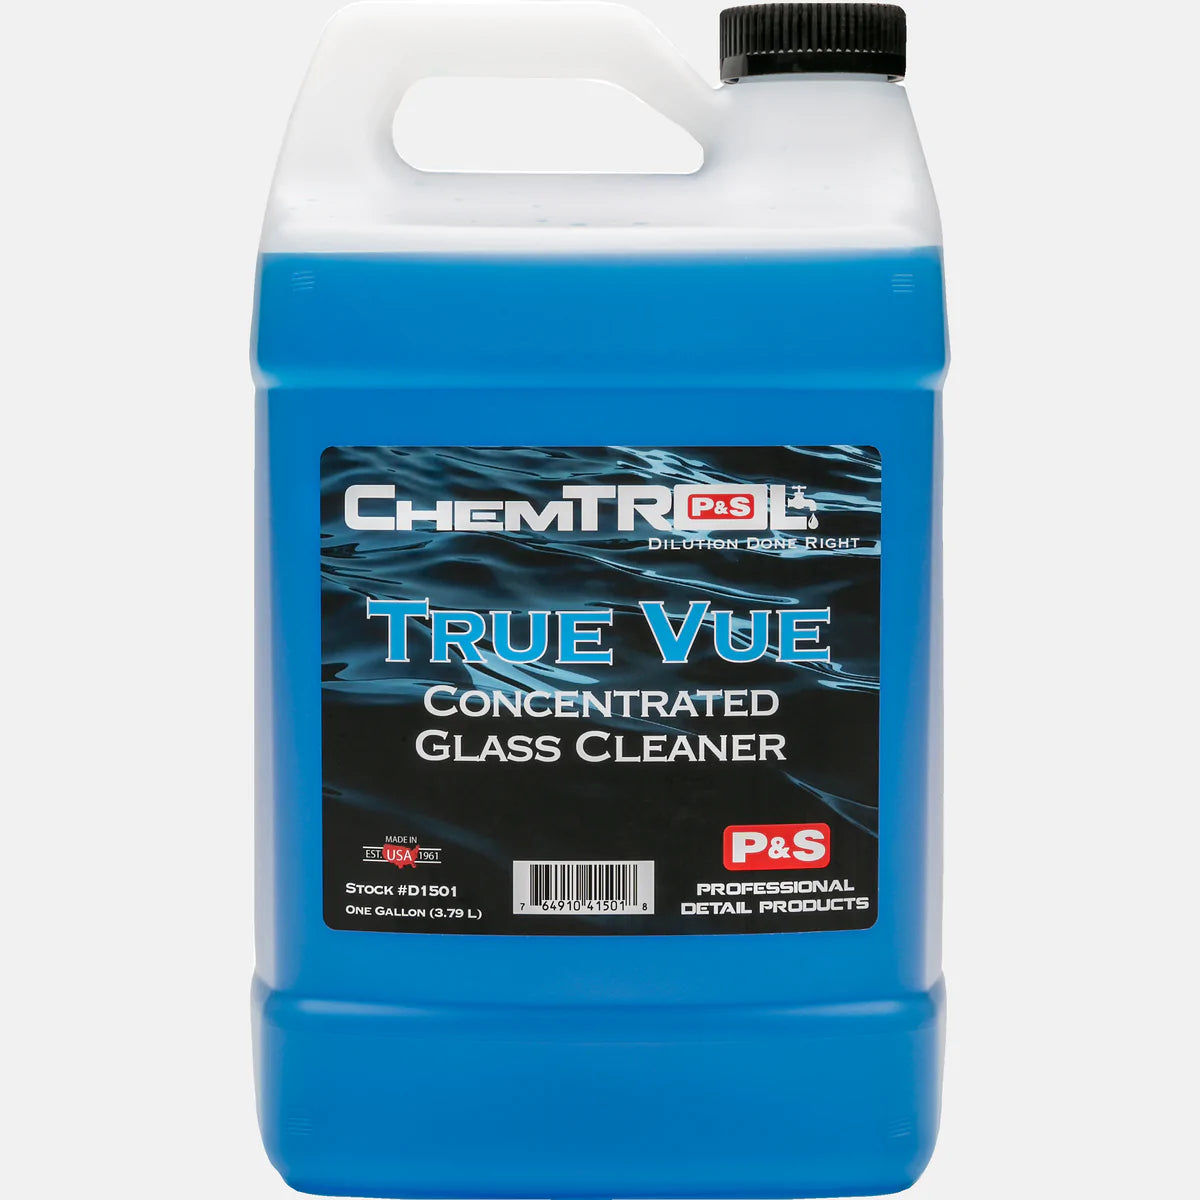 P&S True Vue Concentrated Glass Cleaner 128oz - Gallon